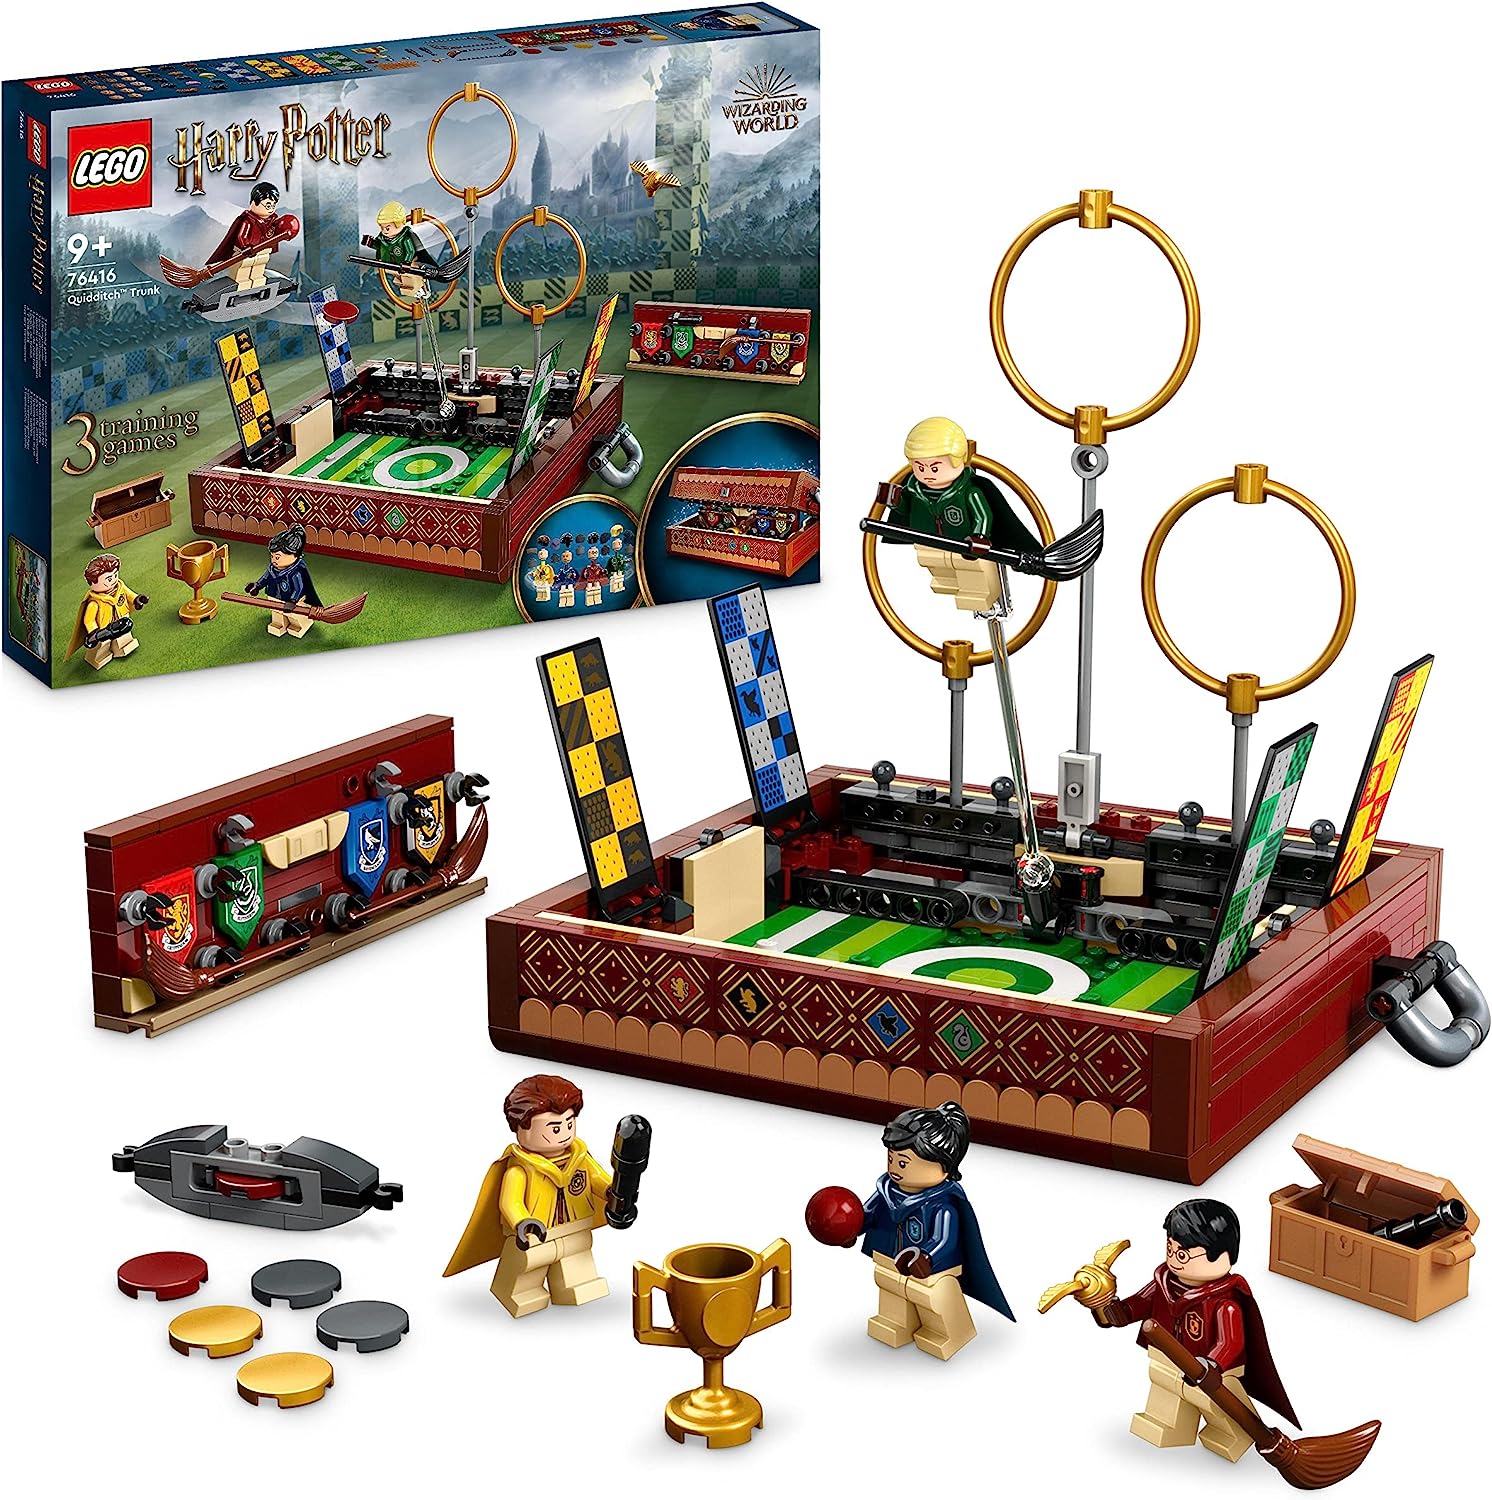 LEGO 76416 Harry Potter Quidditch Suitcase, Toy Set for Building, Solo Or 2 Players, 3 Different Quidditch Games With Draco Malfoy and Cedric Diggory Mini Figures, House Banner & Golden Snitch